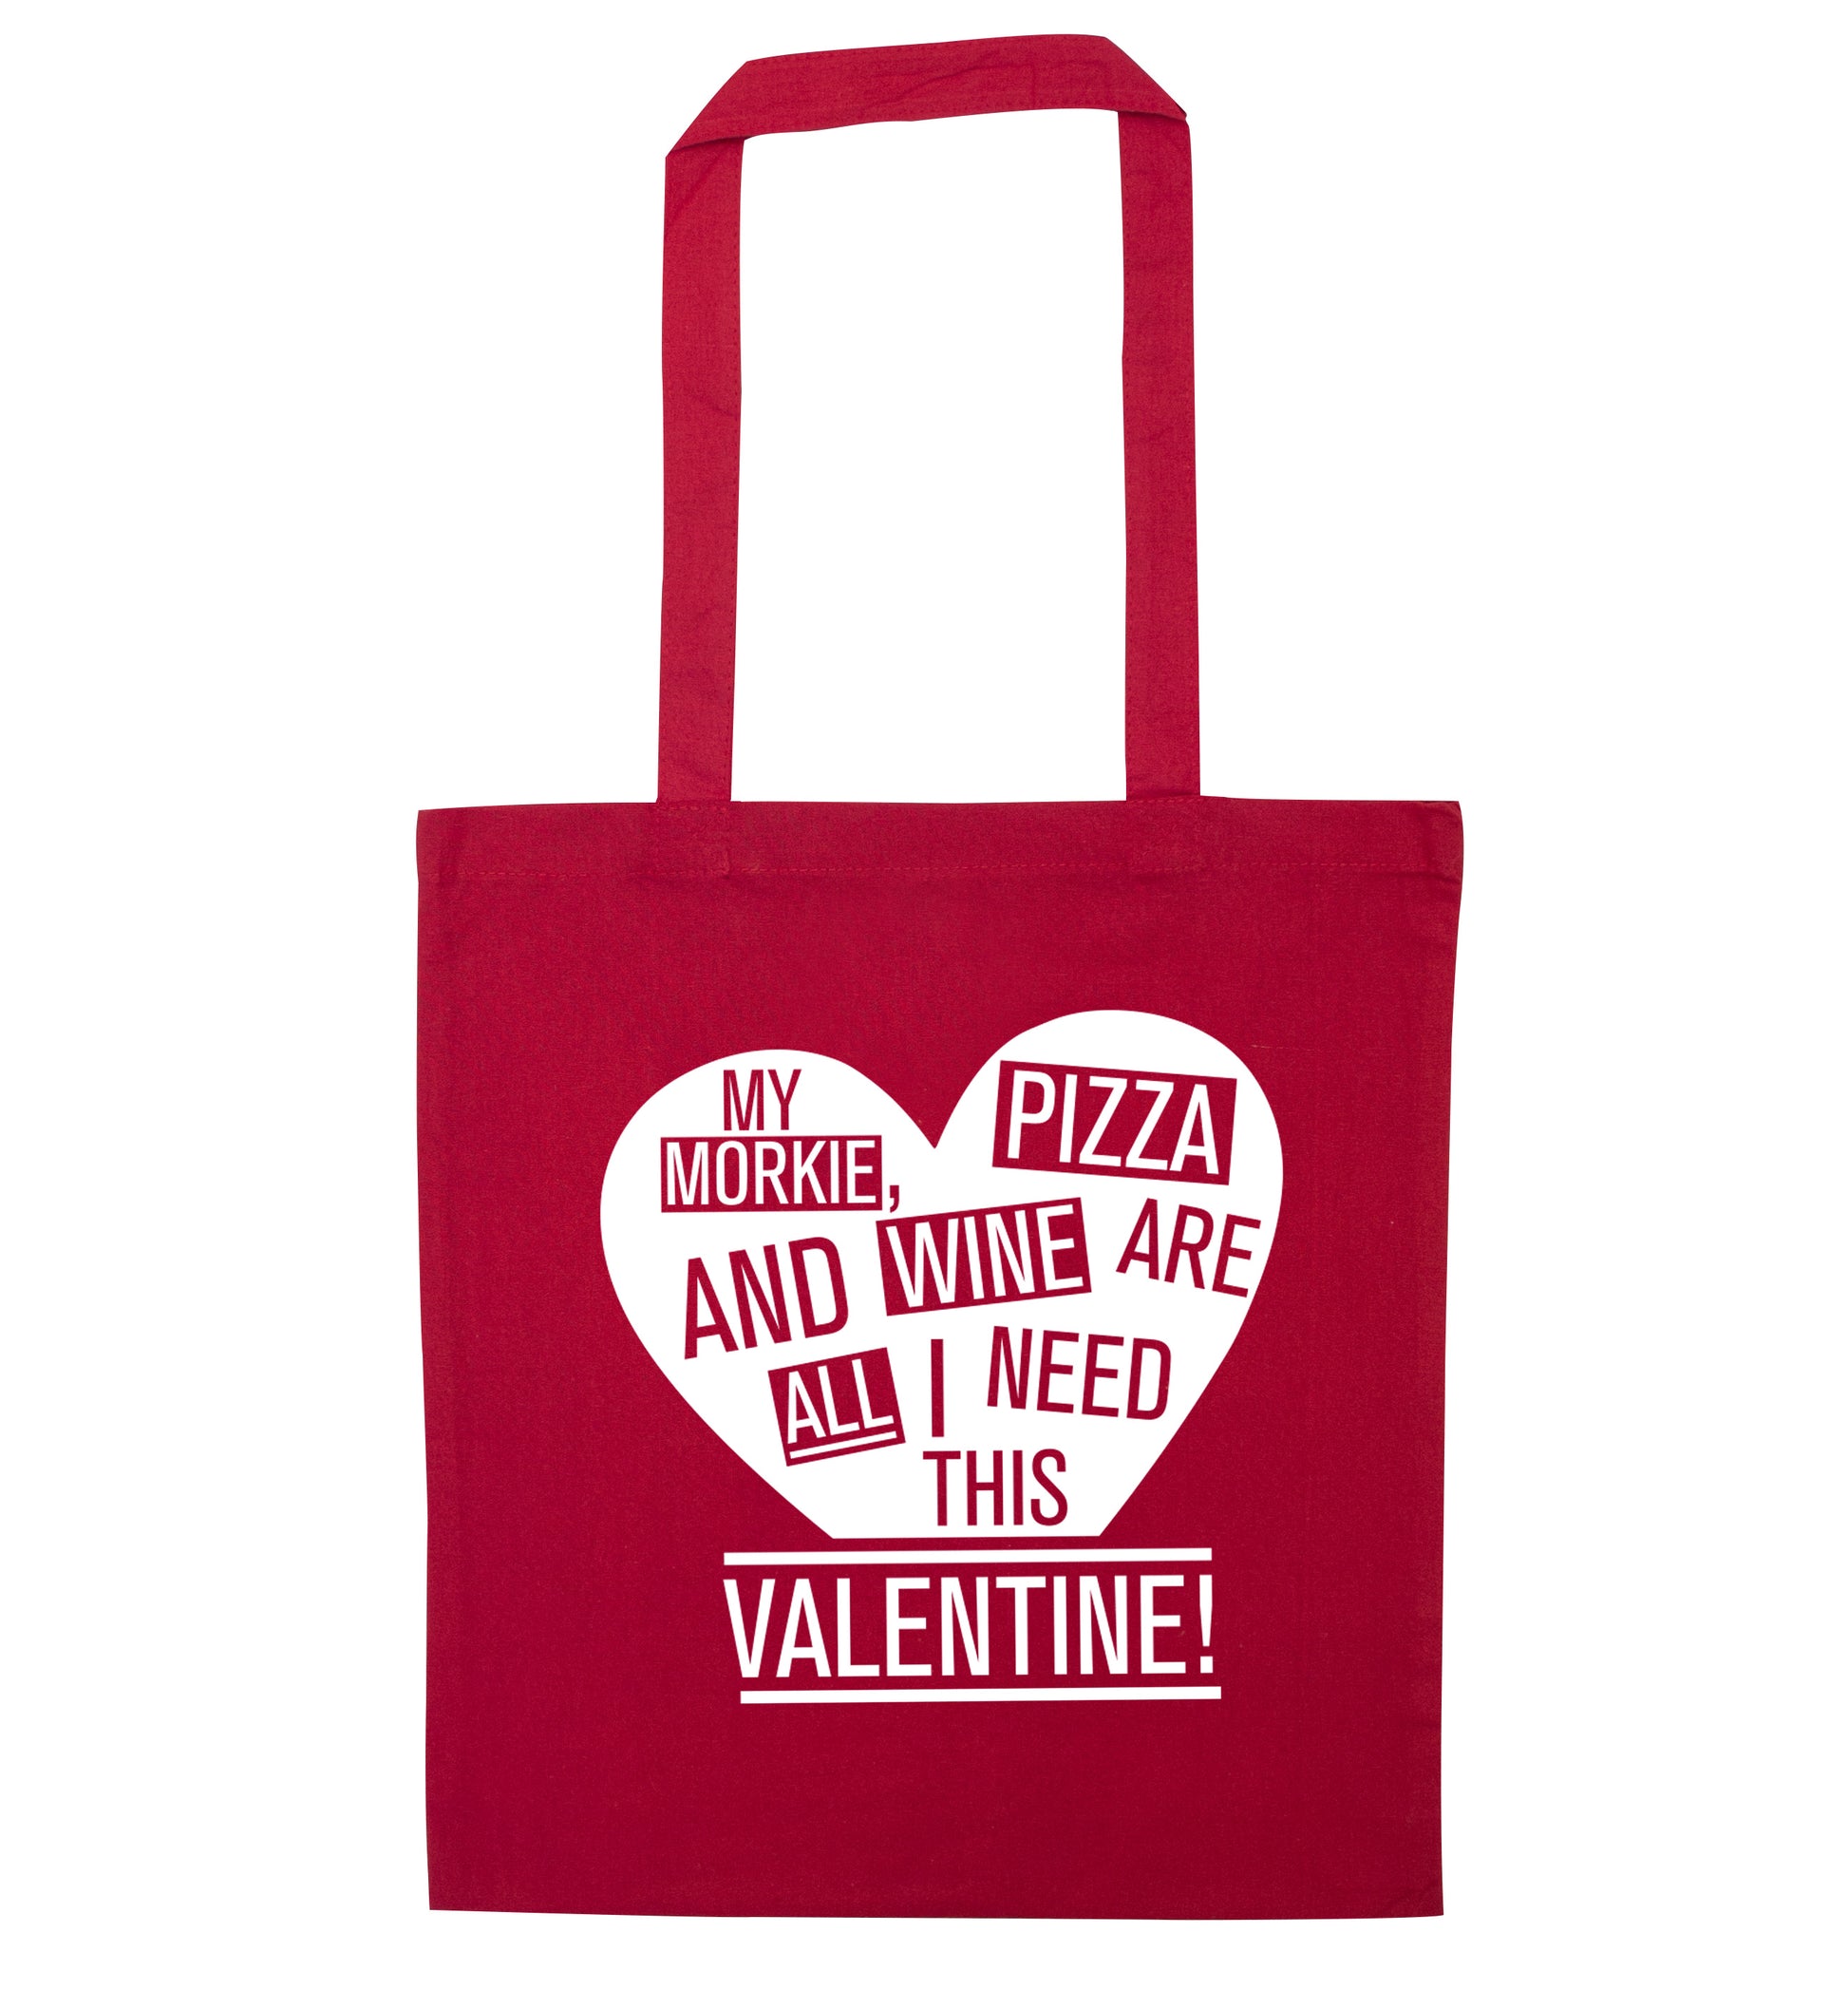 My morkie, pizza and wine are all I need this valentine! red tote bag